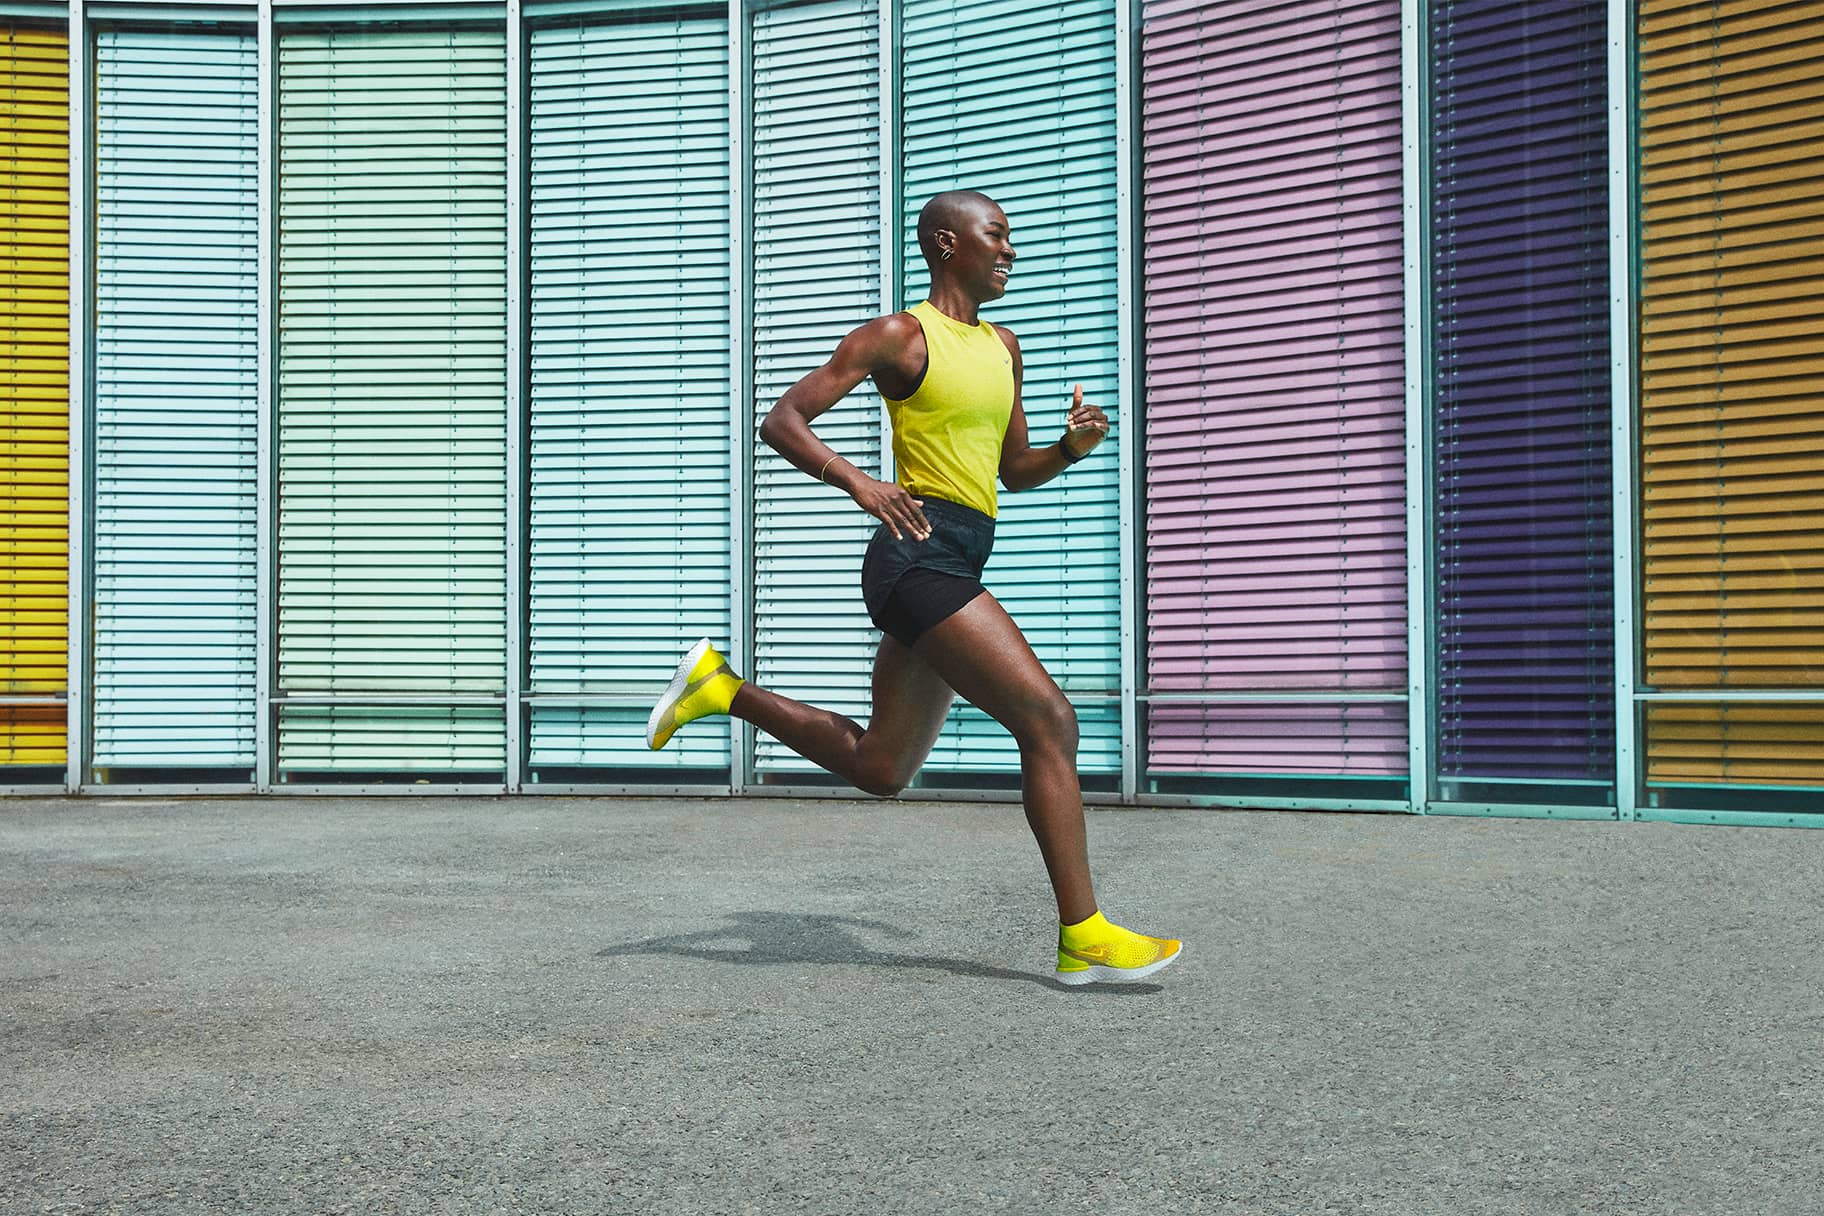 Nike’s Best Lightweight Running Shoes for Speed and Performance